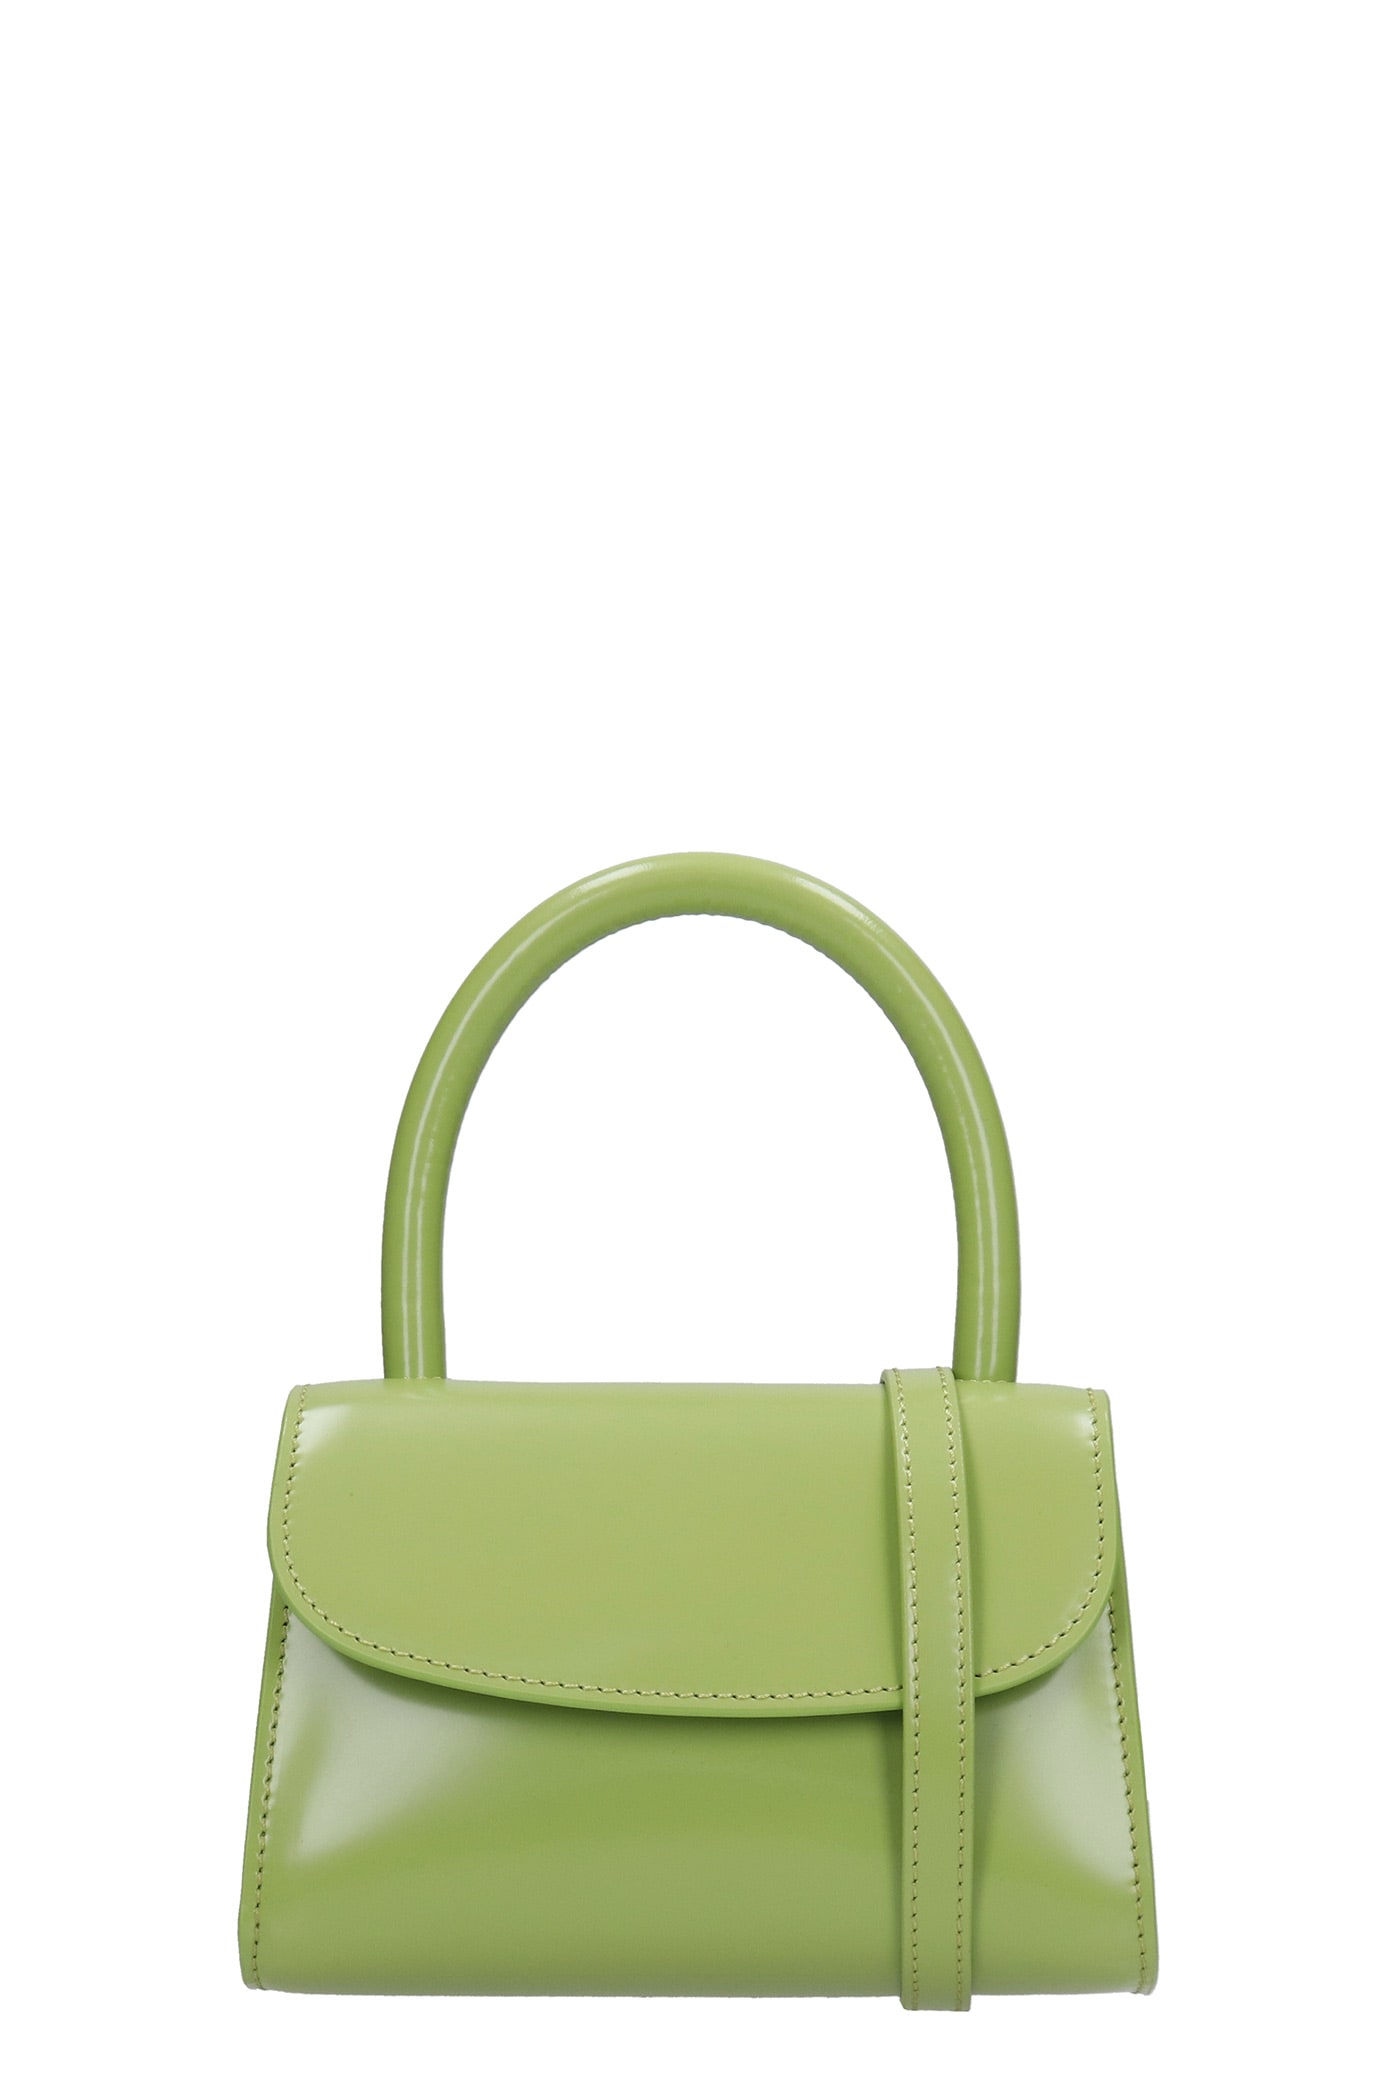 BY FAR Hand Bag In Green Leather